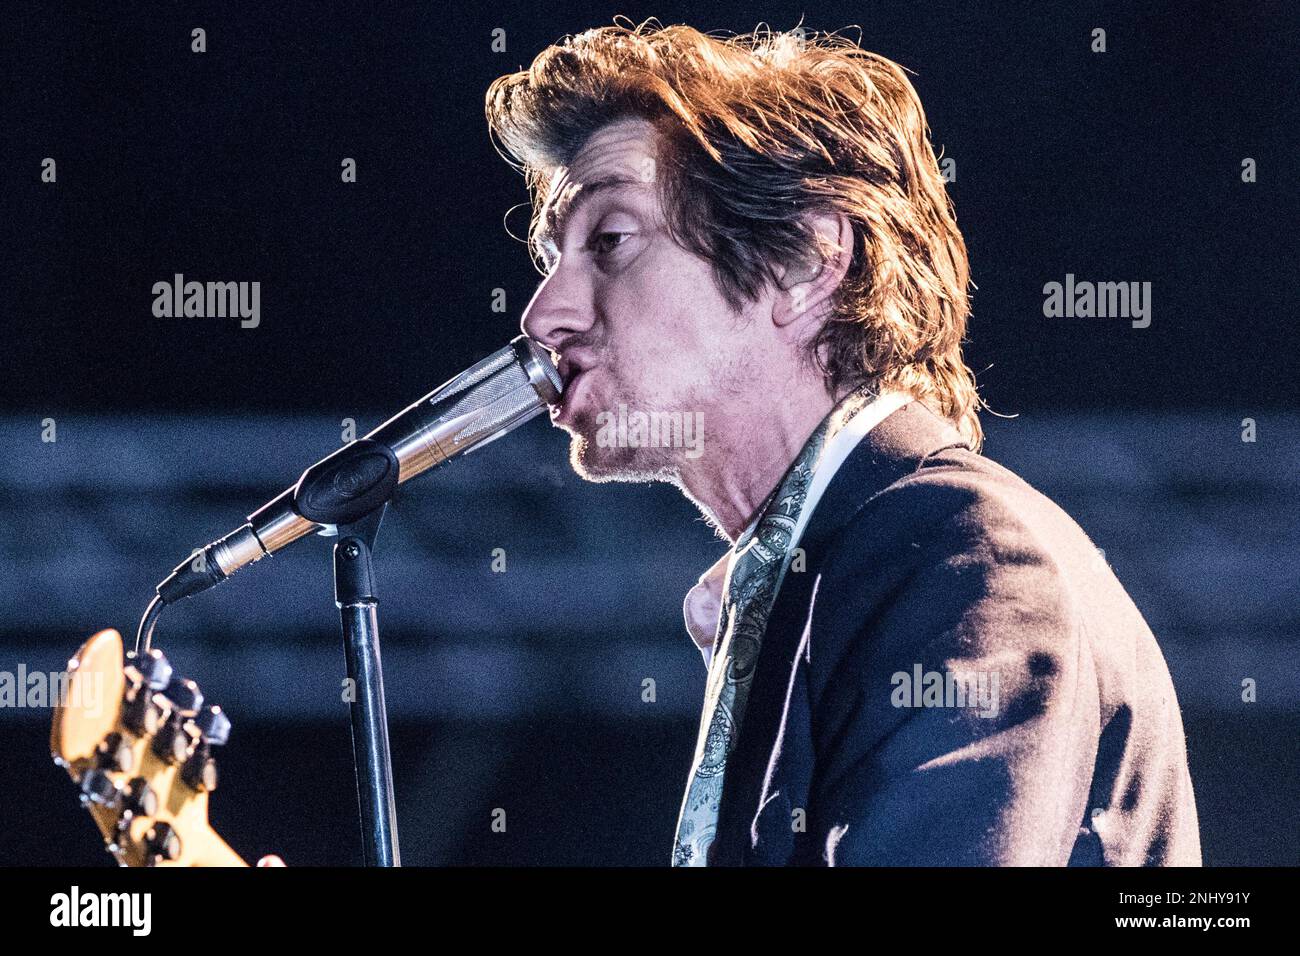 PR - Curitiba - 11/08/2022 - CURITIBA, ARCTIC MONKEYS SHOW - Alex Turner of the band Arctic Monkeys during a presentation at Pedreira Paulo Leminski in the city of Curitiba, this Tuesday (8). British band is on tour in South America. Photo: Robson Mafra/AGIF (via AP) Stock Photo